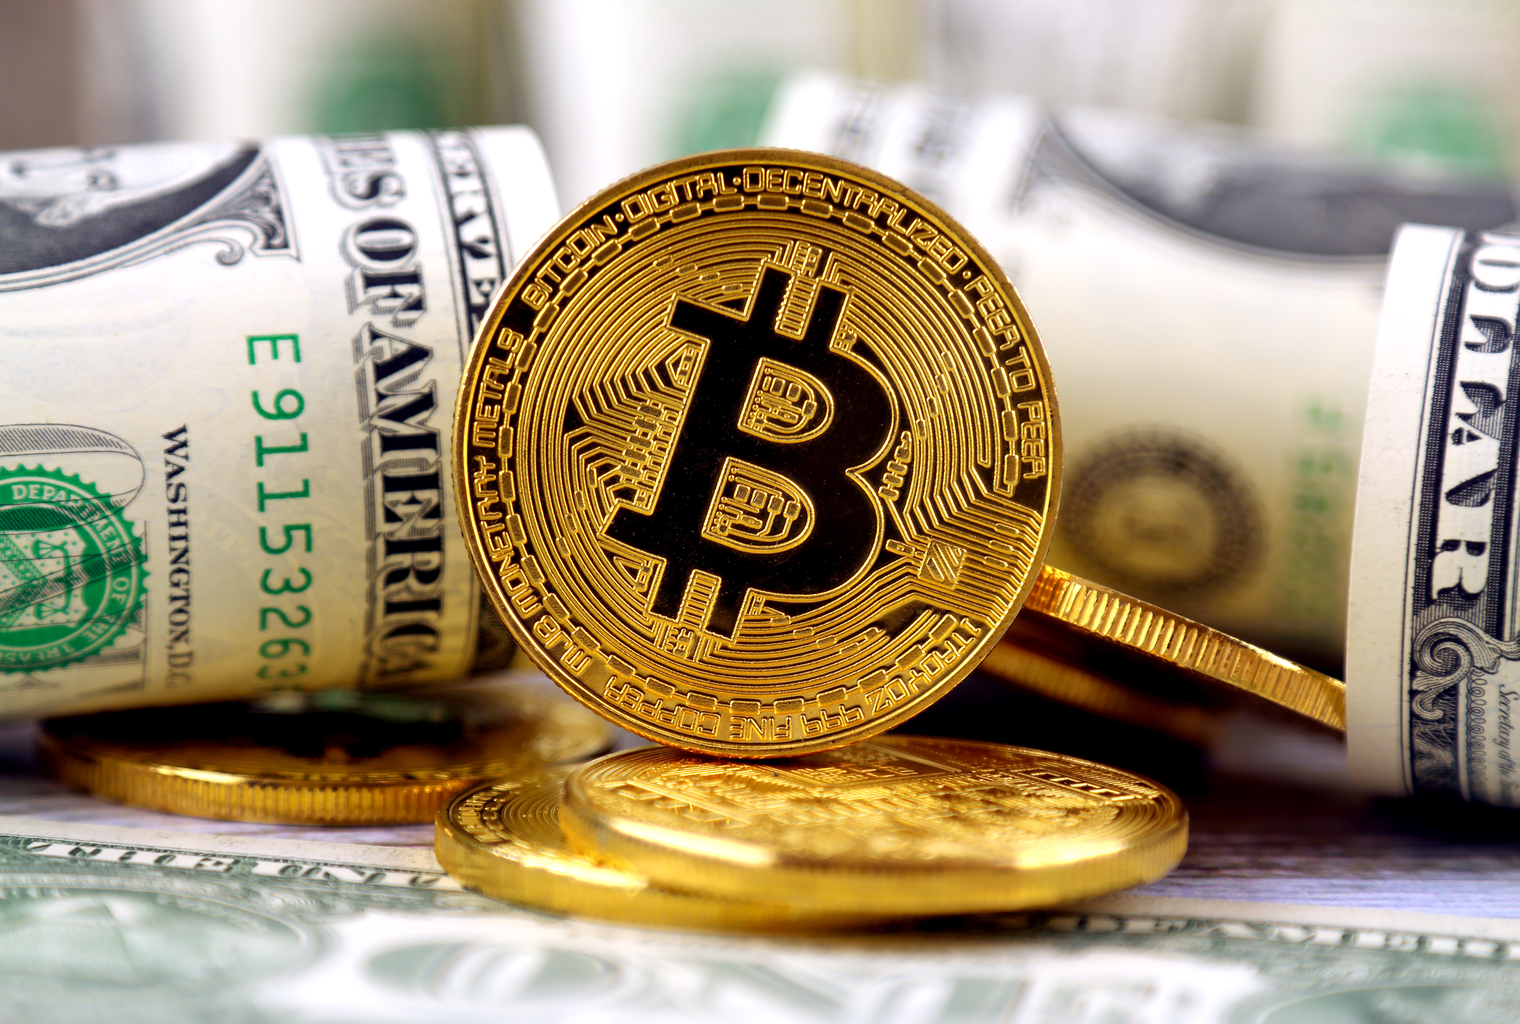 Image of bitcoin currency learn forex trading in india pdf reader